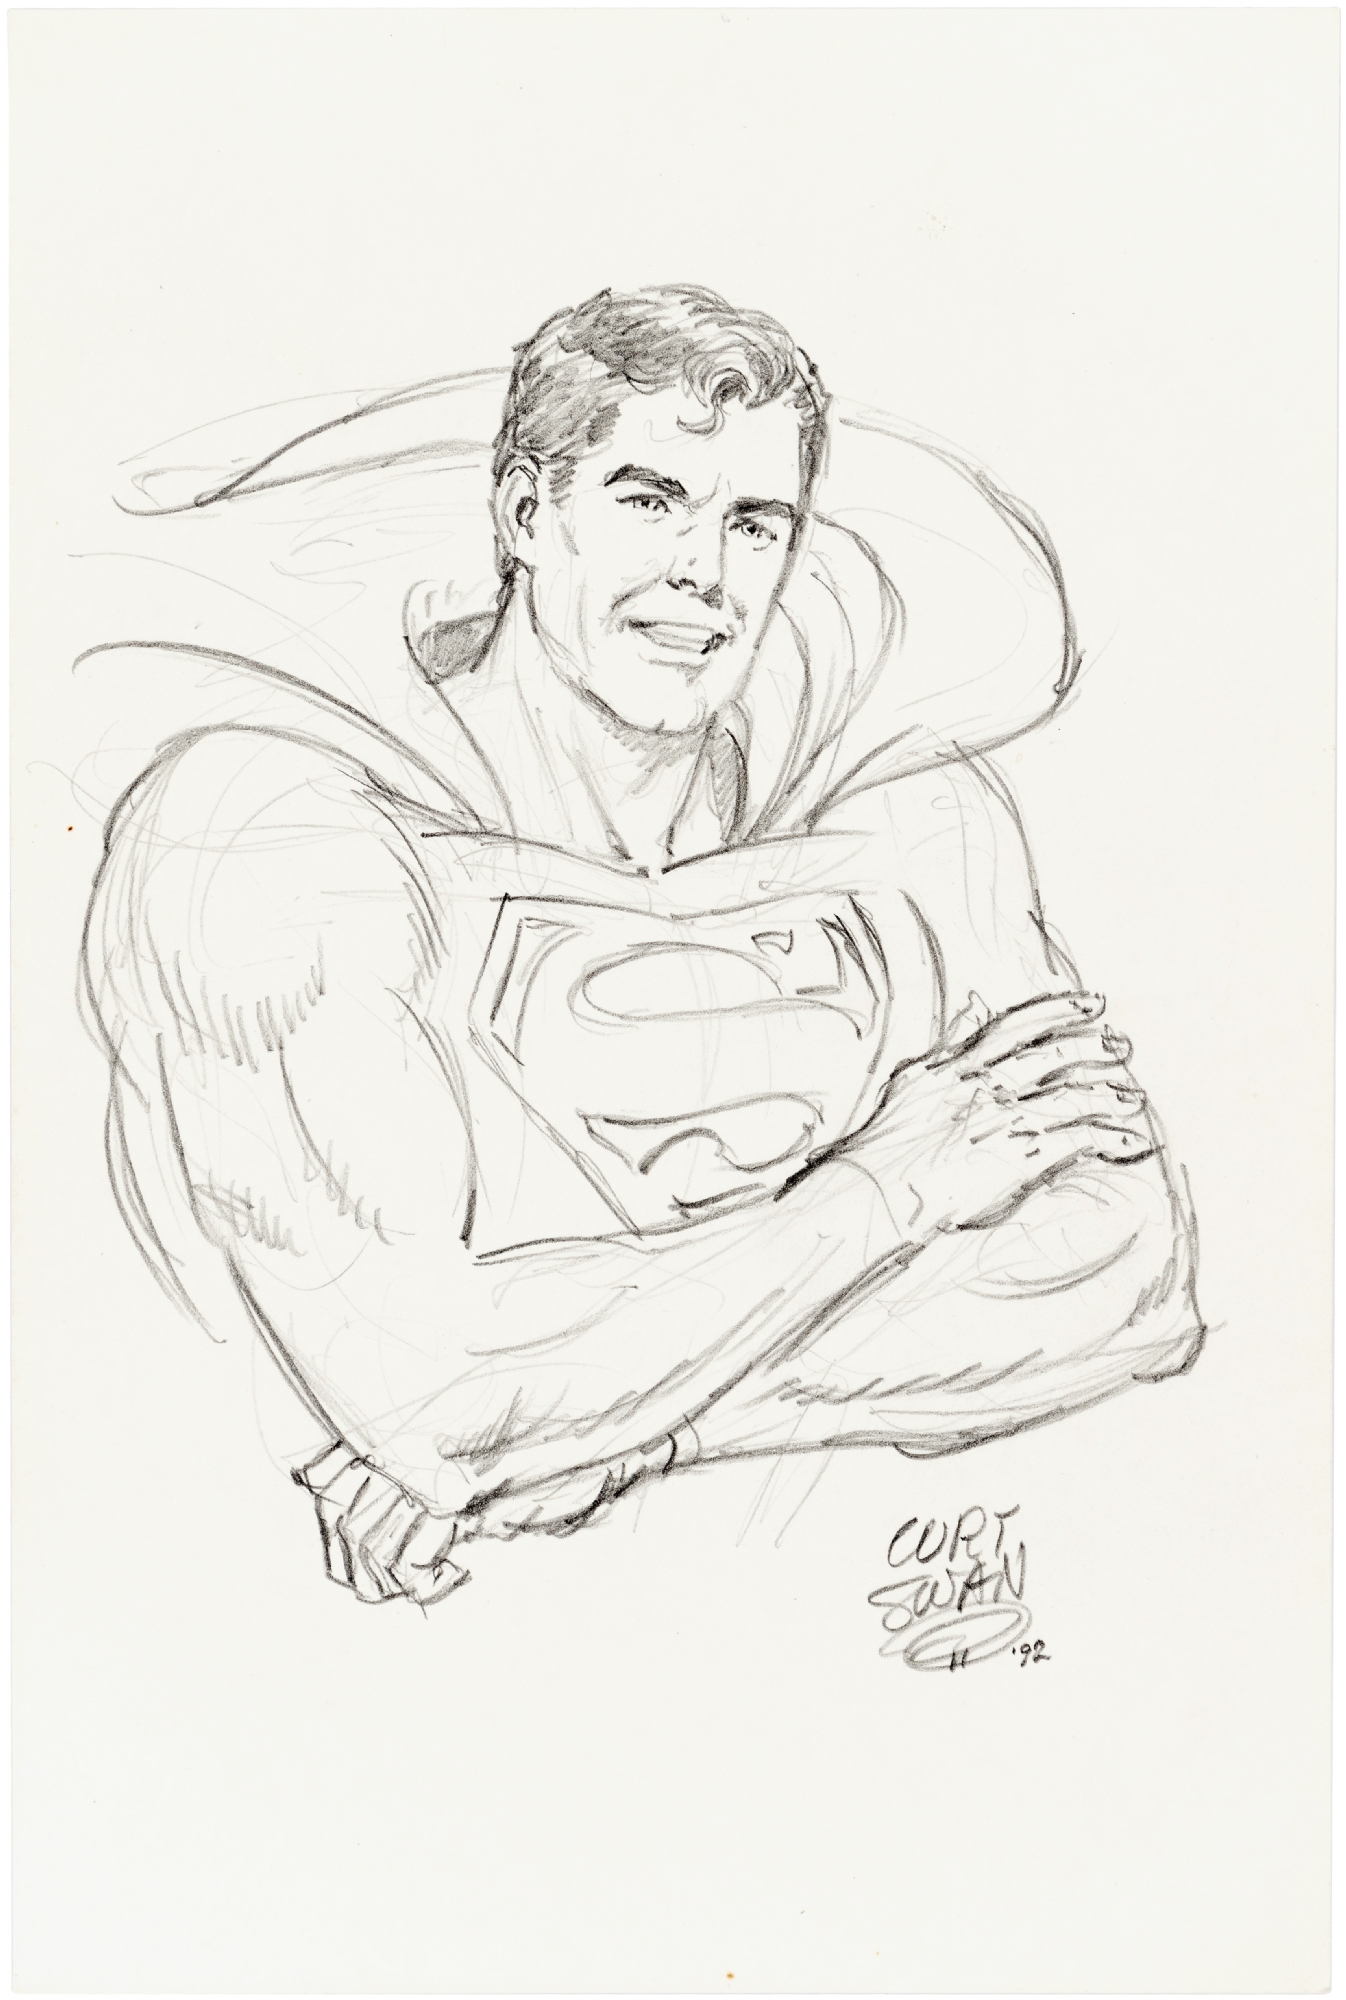 How to Draw Superheroes  How to ink the Incredible Hulk  Epic Heroes  Entertainment Movies Toys TV Video Games News Art